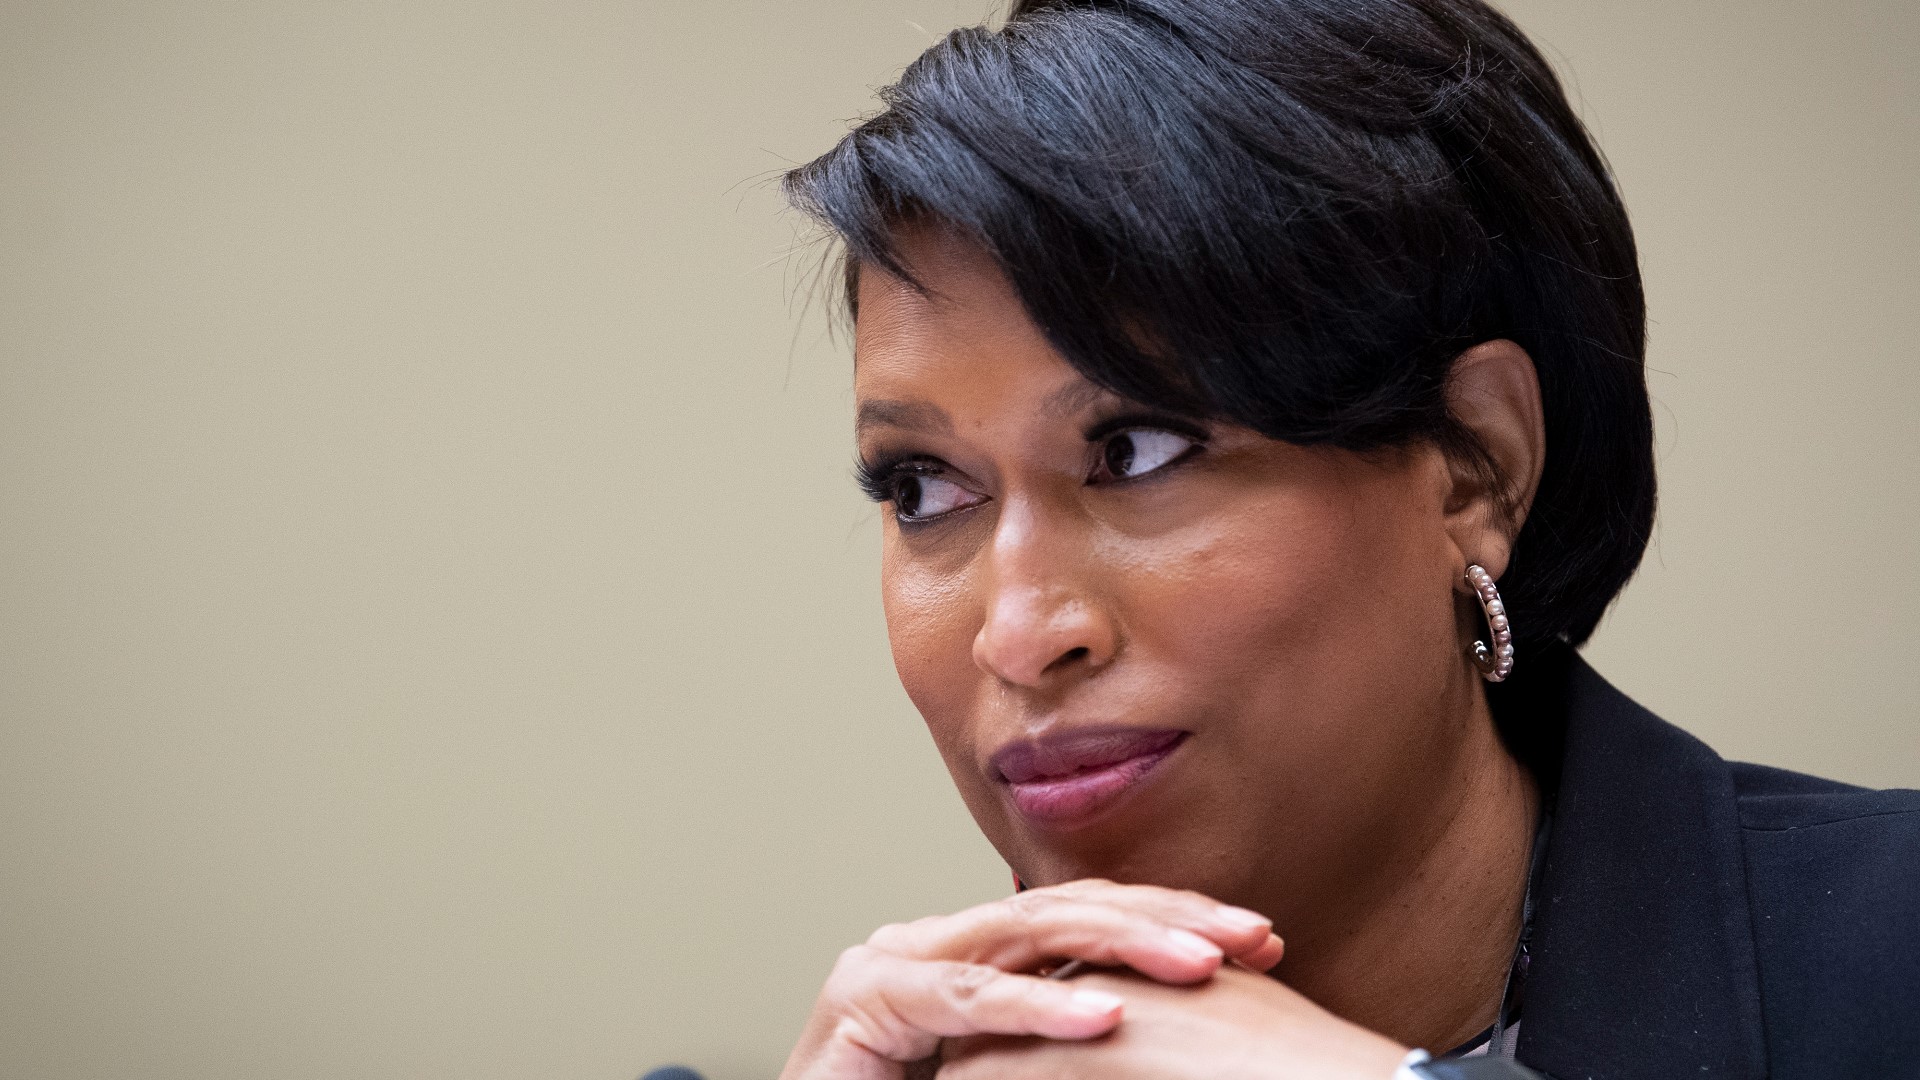 DC Mayor Muriel Bowser's office responded to a controversy involving the mayor photographed without a mask at a wedding reception hours after implementing a mandate.